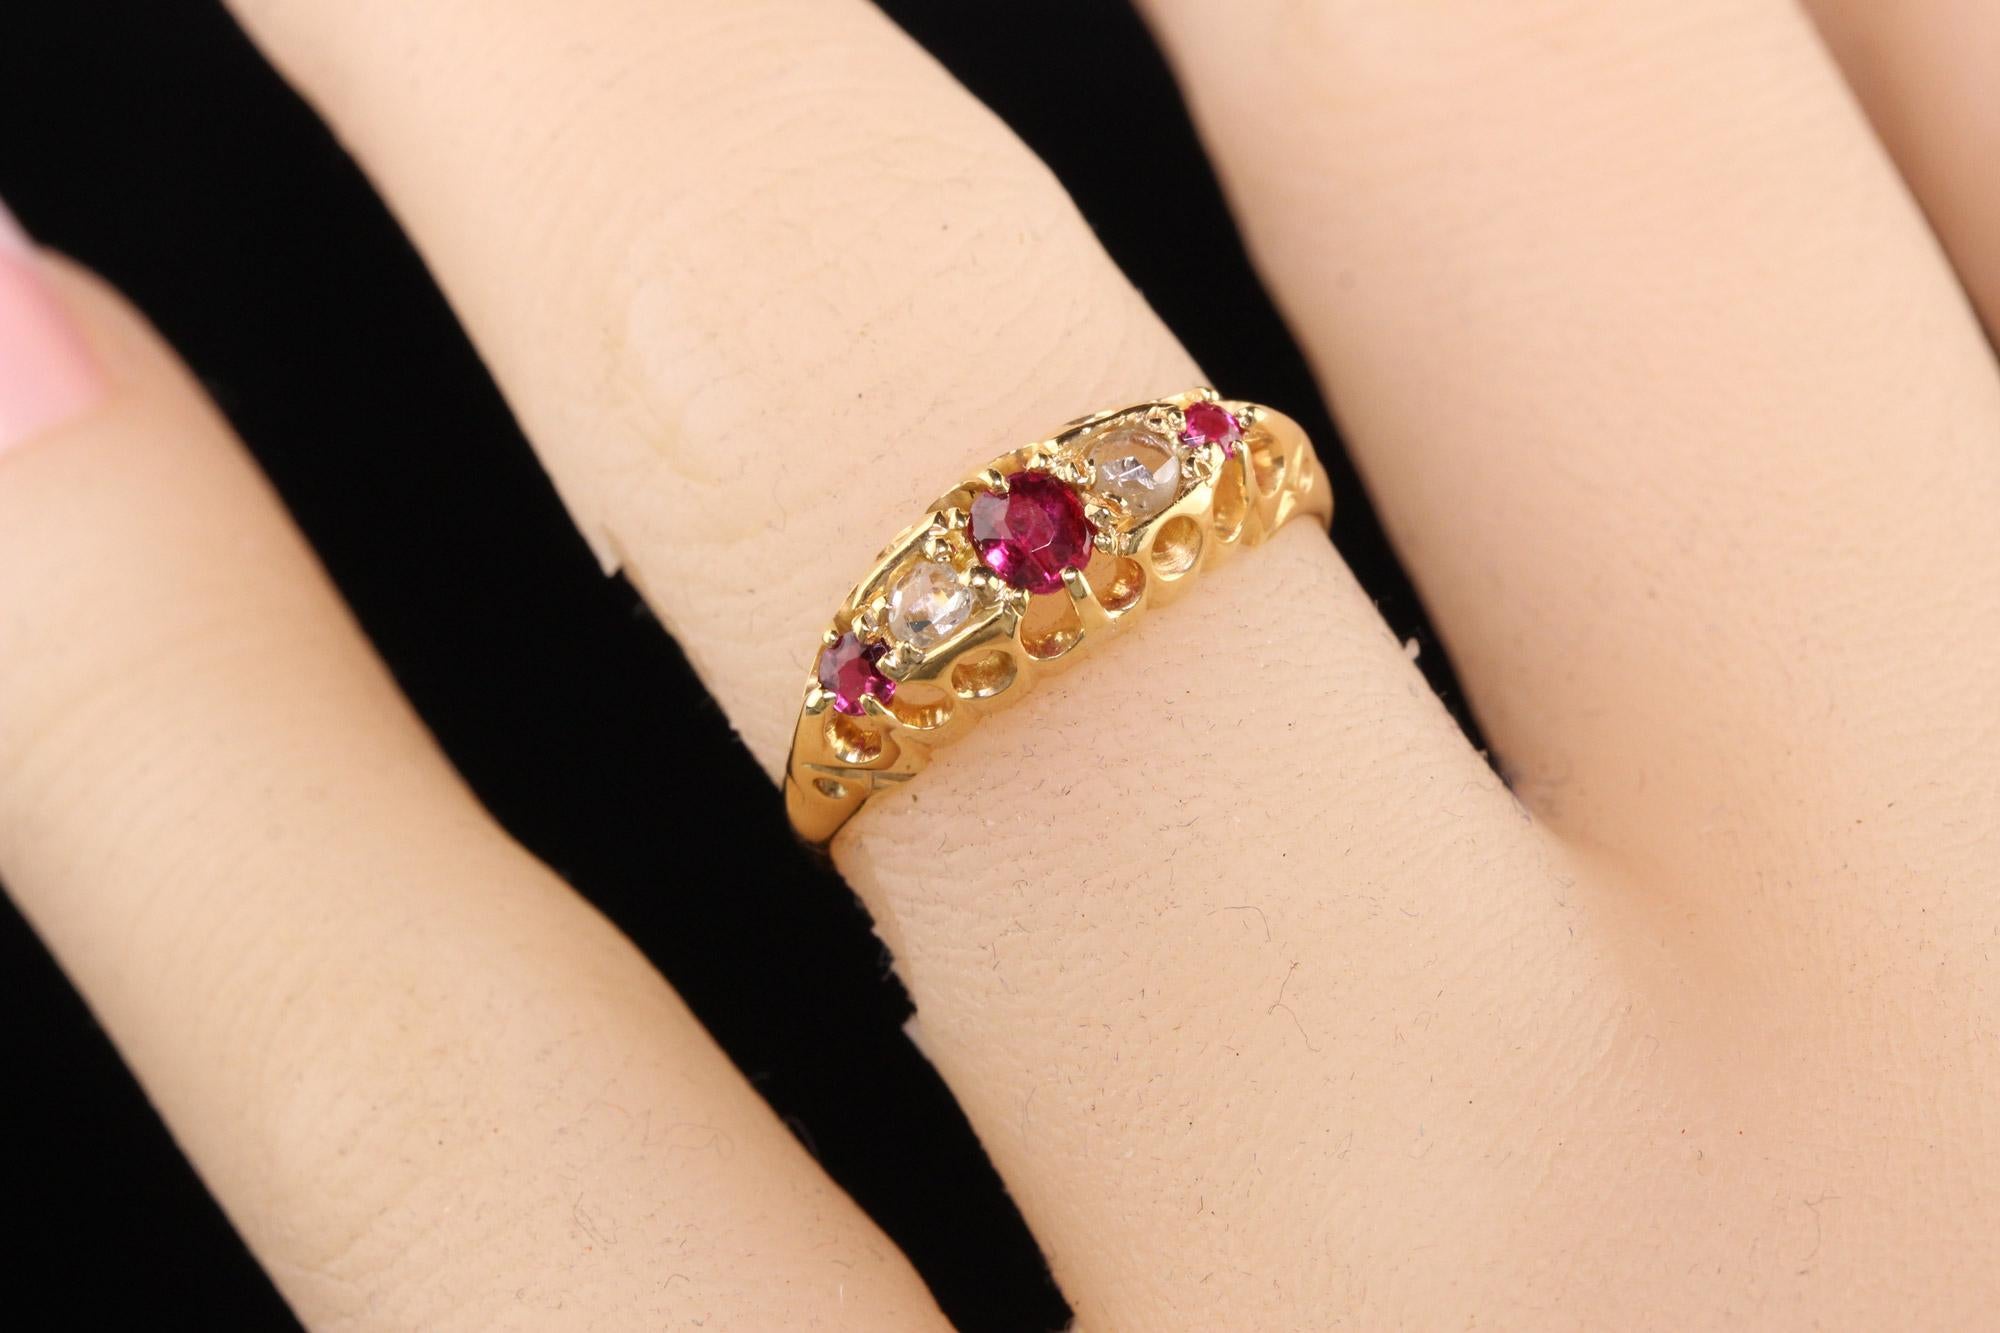 Antique Victorian English 18K Yellow Gold Rose Cut Diamond and Ruby Ring 2